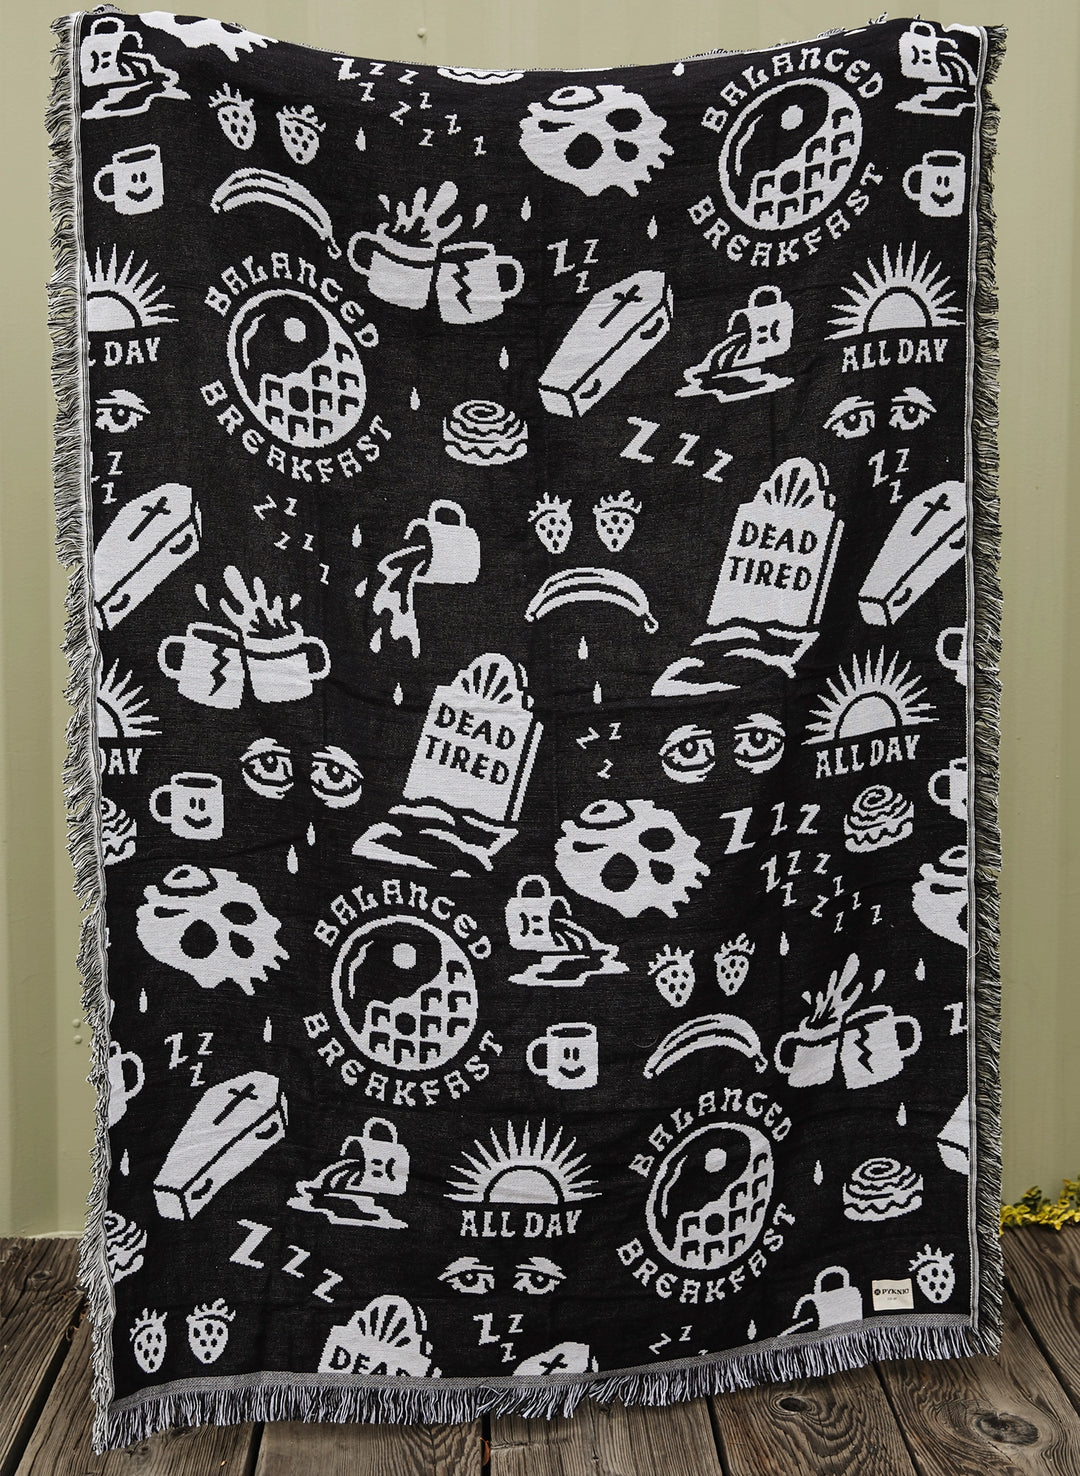 Dead Tired Cotton Blanket with Coffee Graphic Pattern